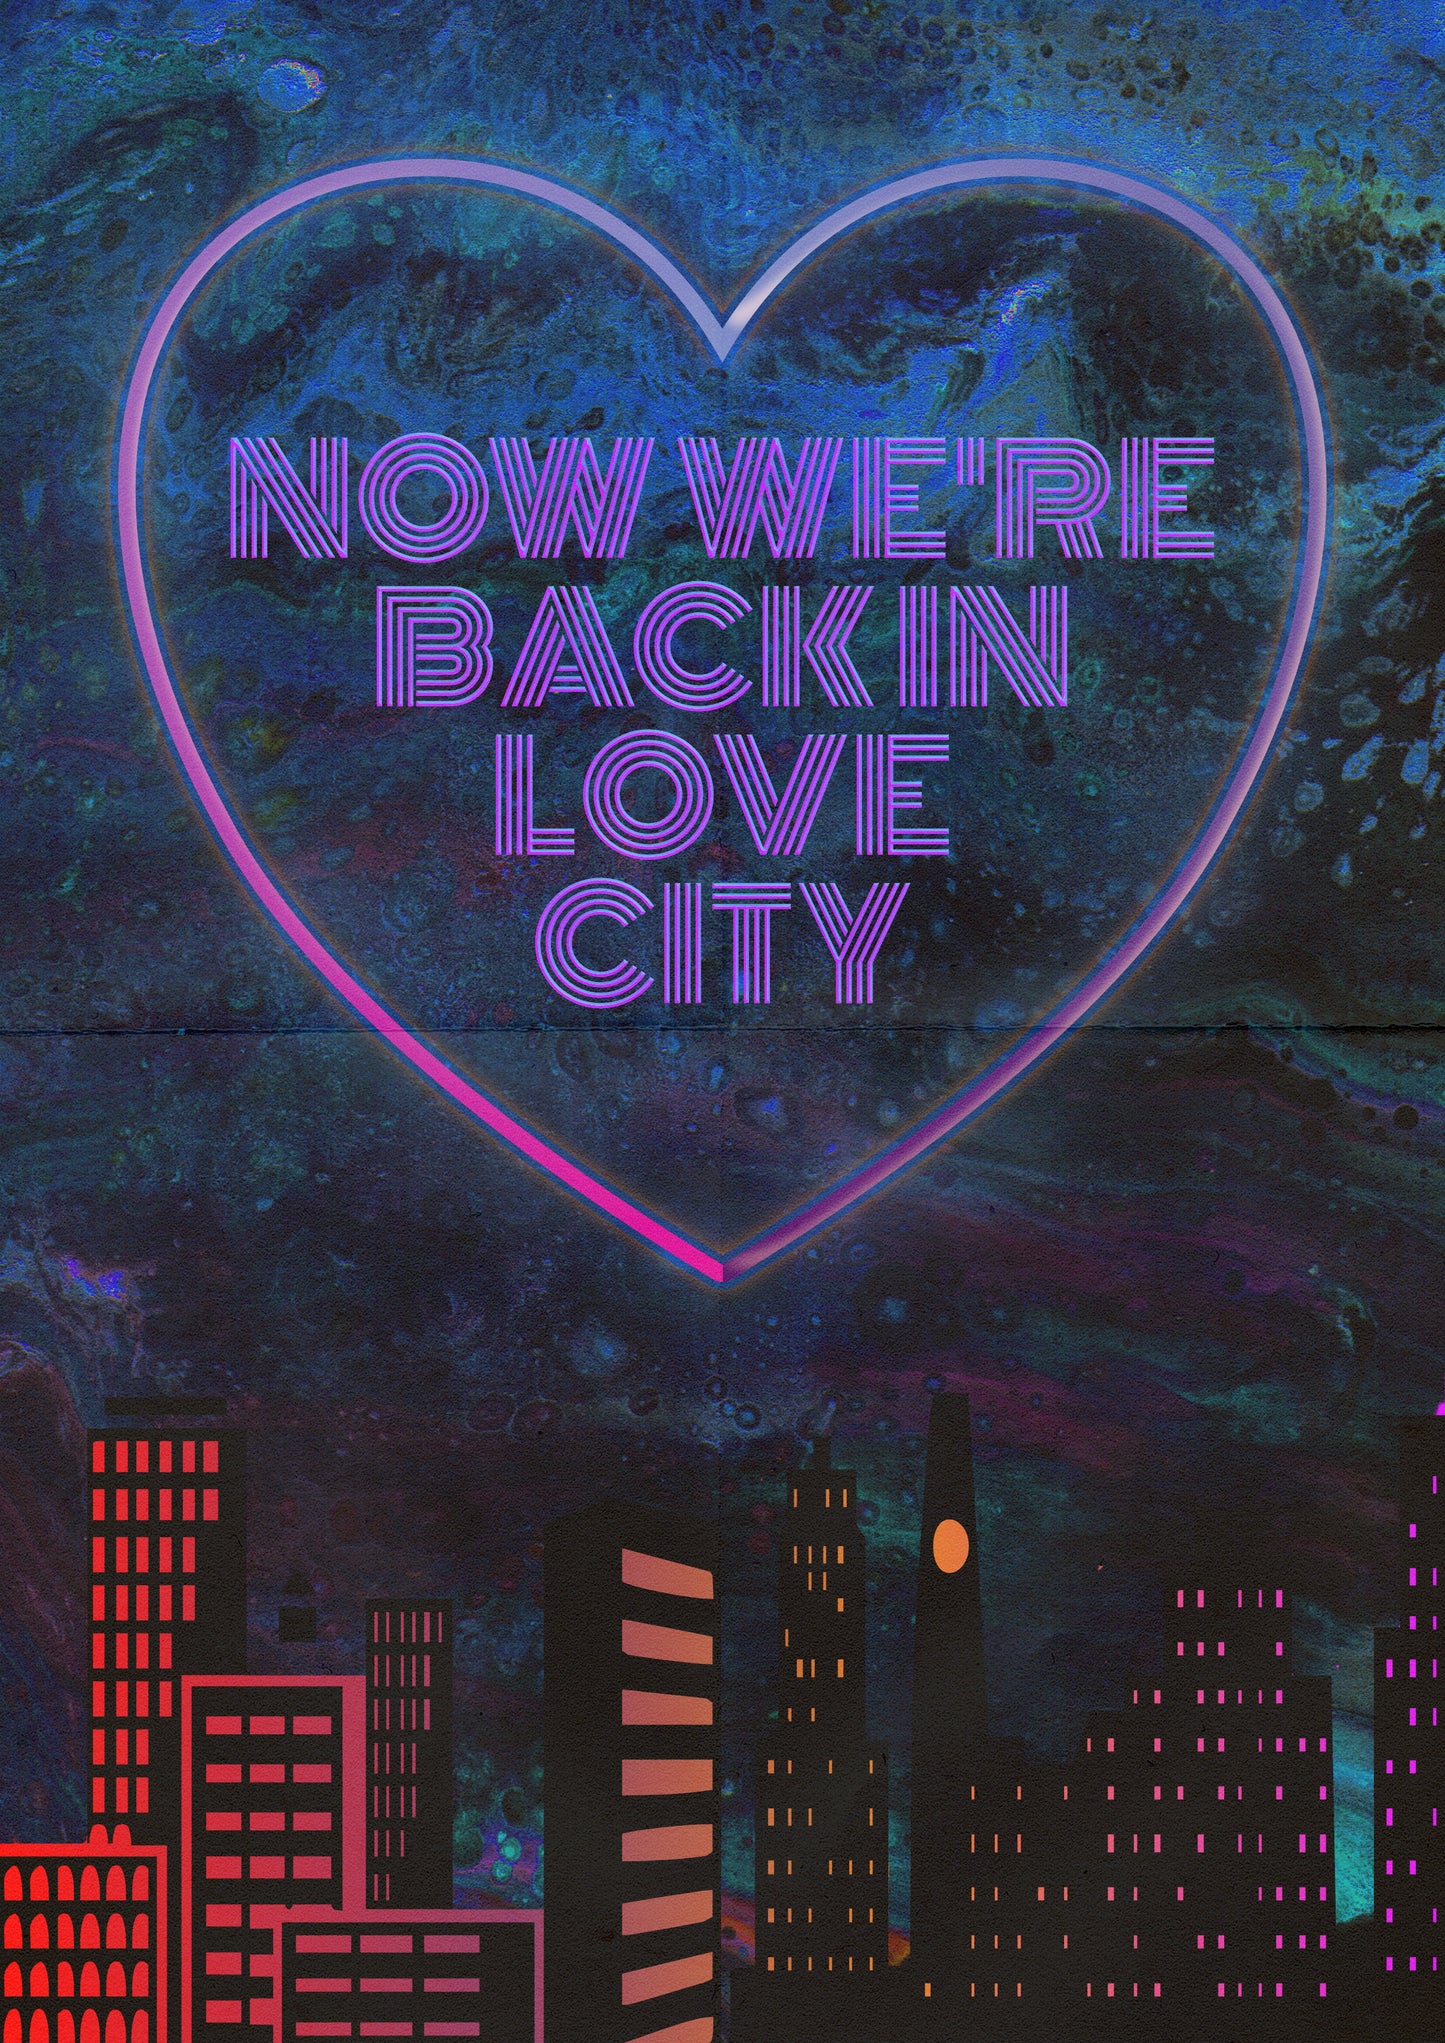 NOW WE'RE BACK IN LOVE CITY